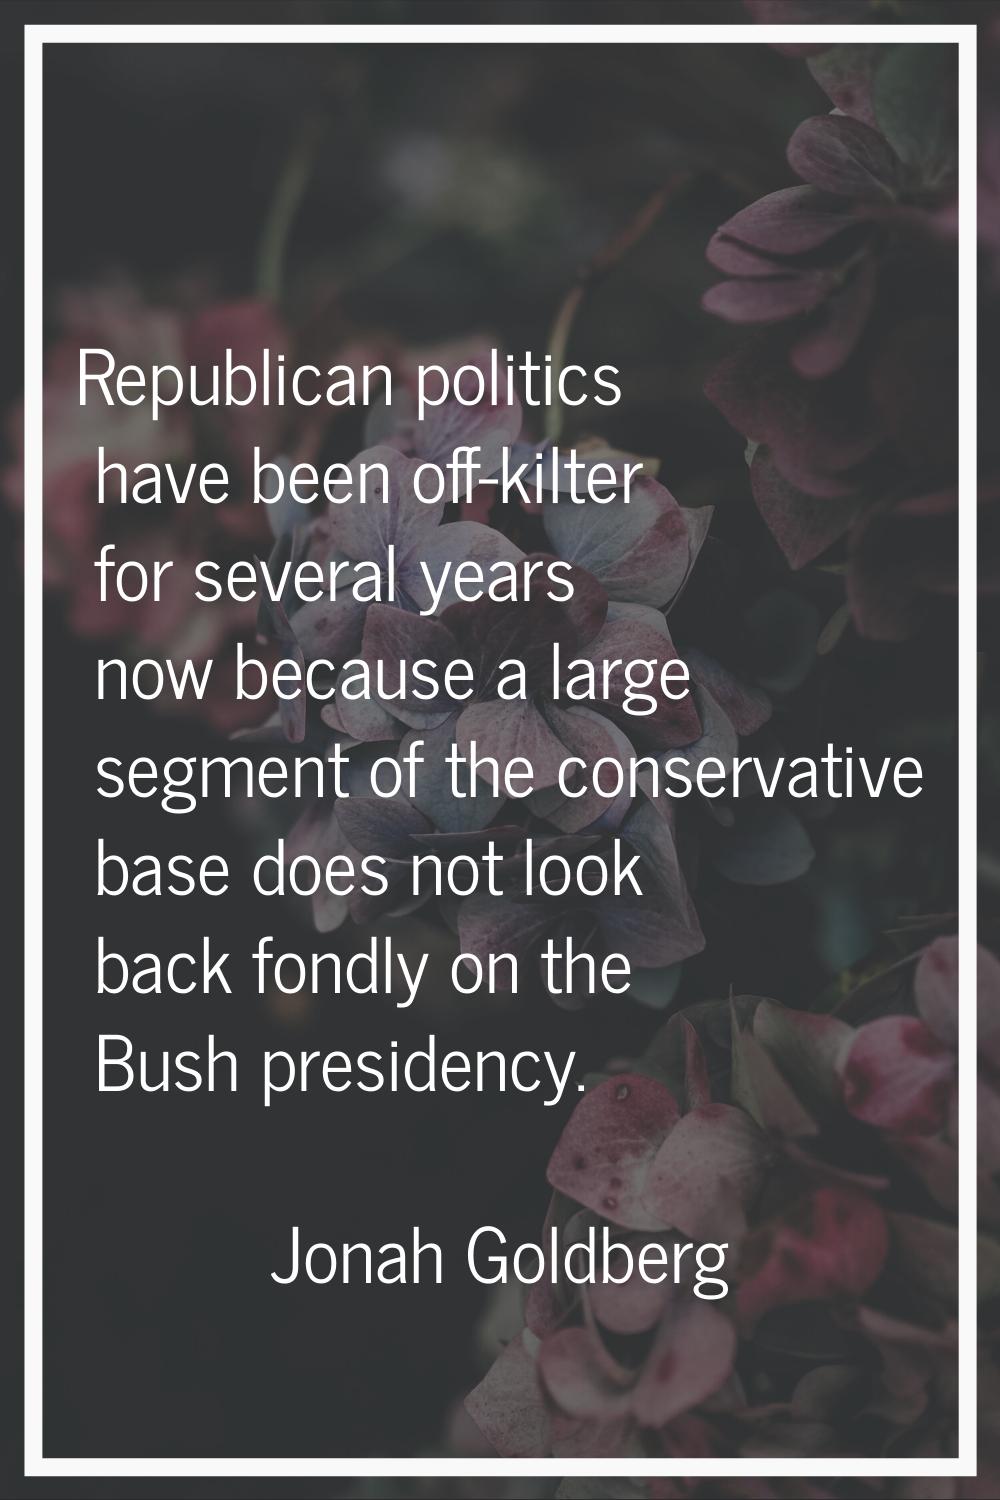 Republican politics have been off-kilter for several years now because a large segment of the conse